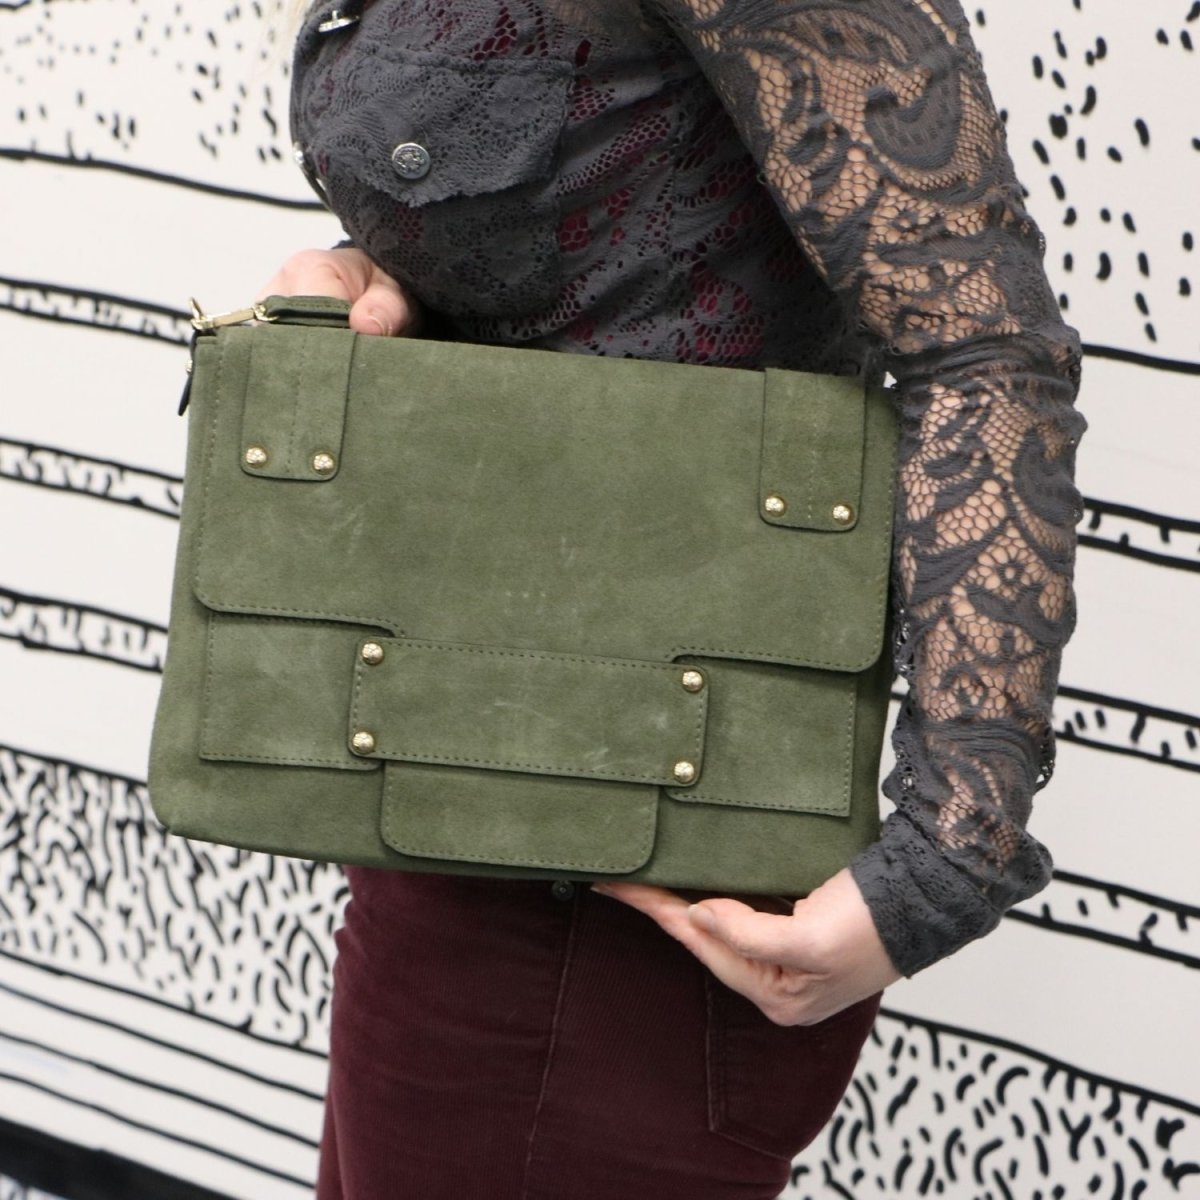 Suede Leather Cross Body / Clutch Bag - Ozzell London